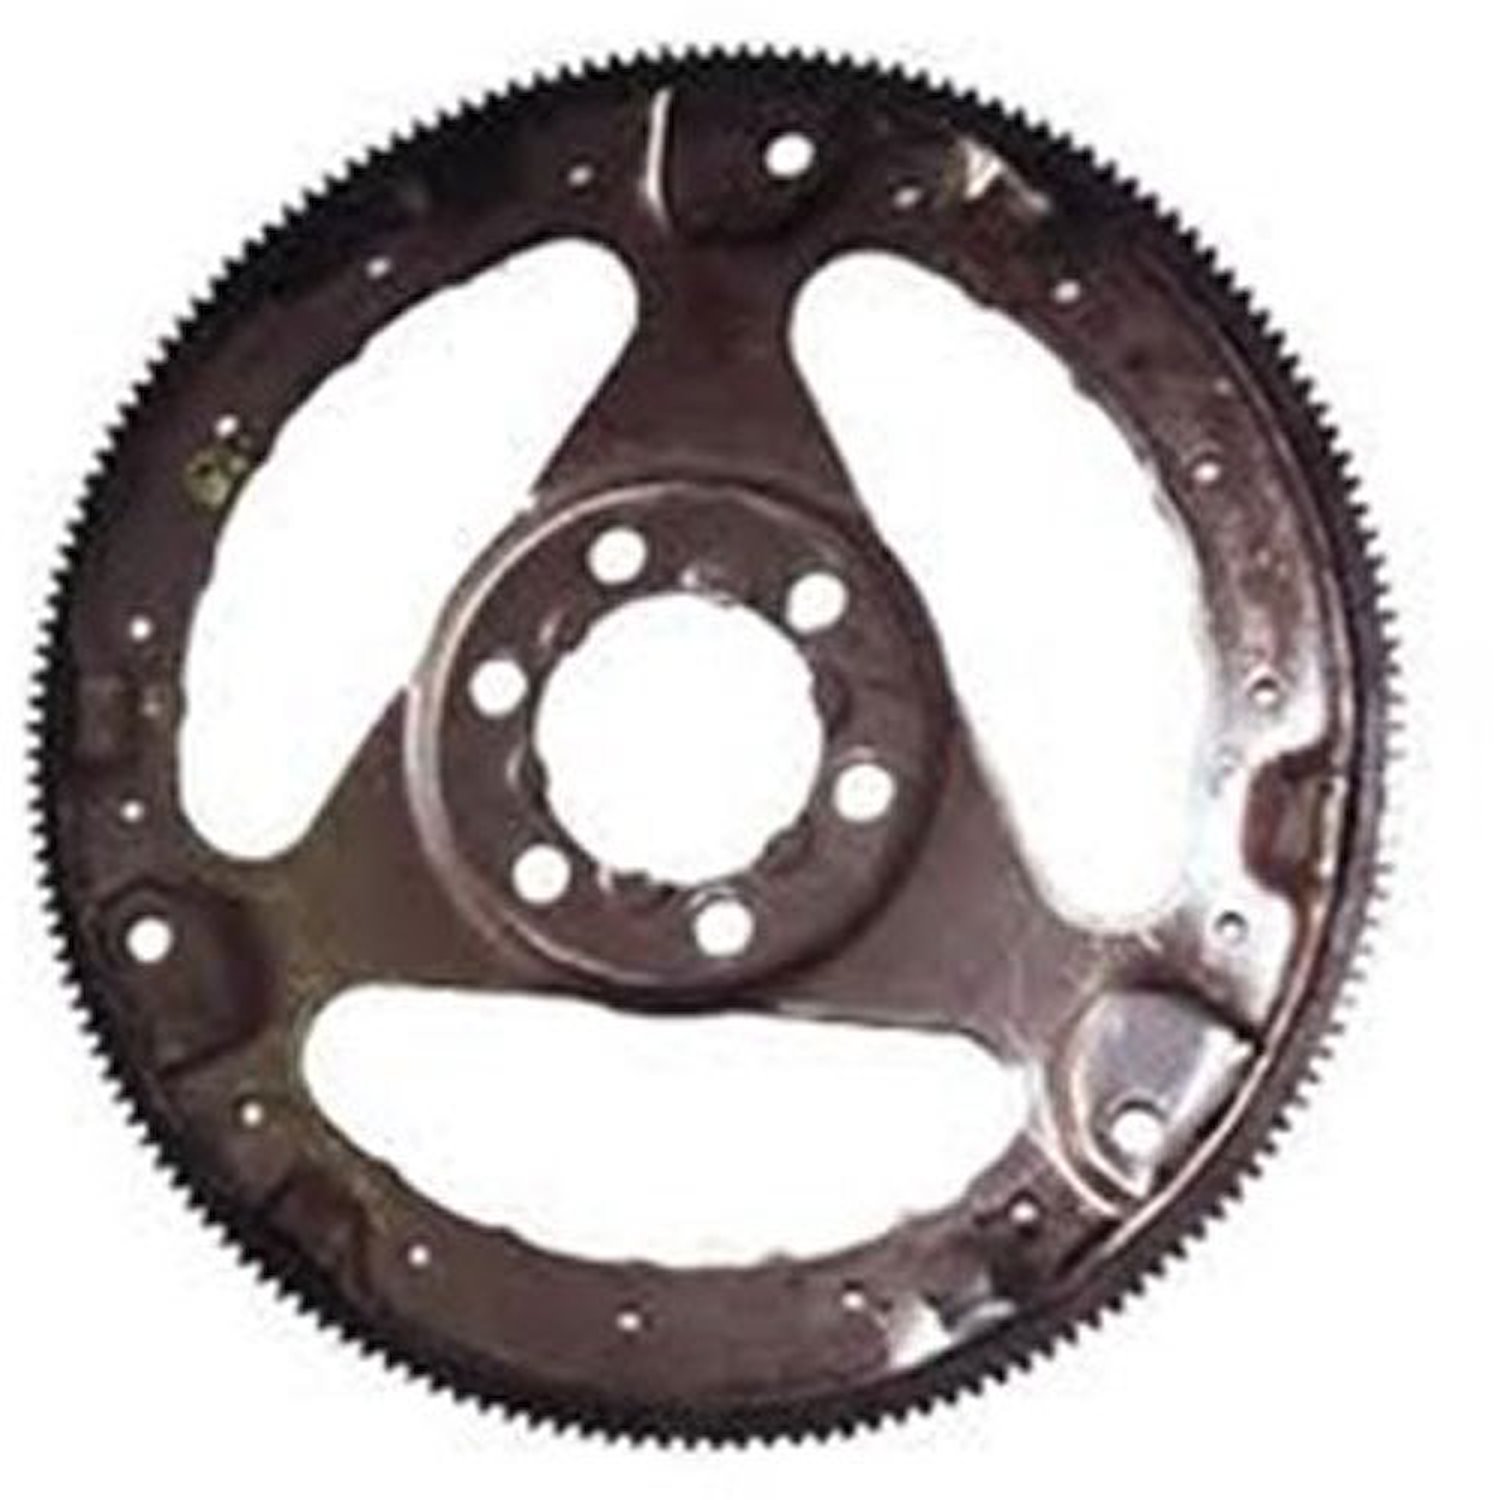 This automatic transmission flexplate from Omix-ADA fits 76-79 Jeep CJ5 and CJ7 with a 258 cubic inch 6-cylinder engine.